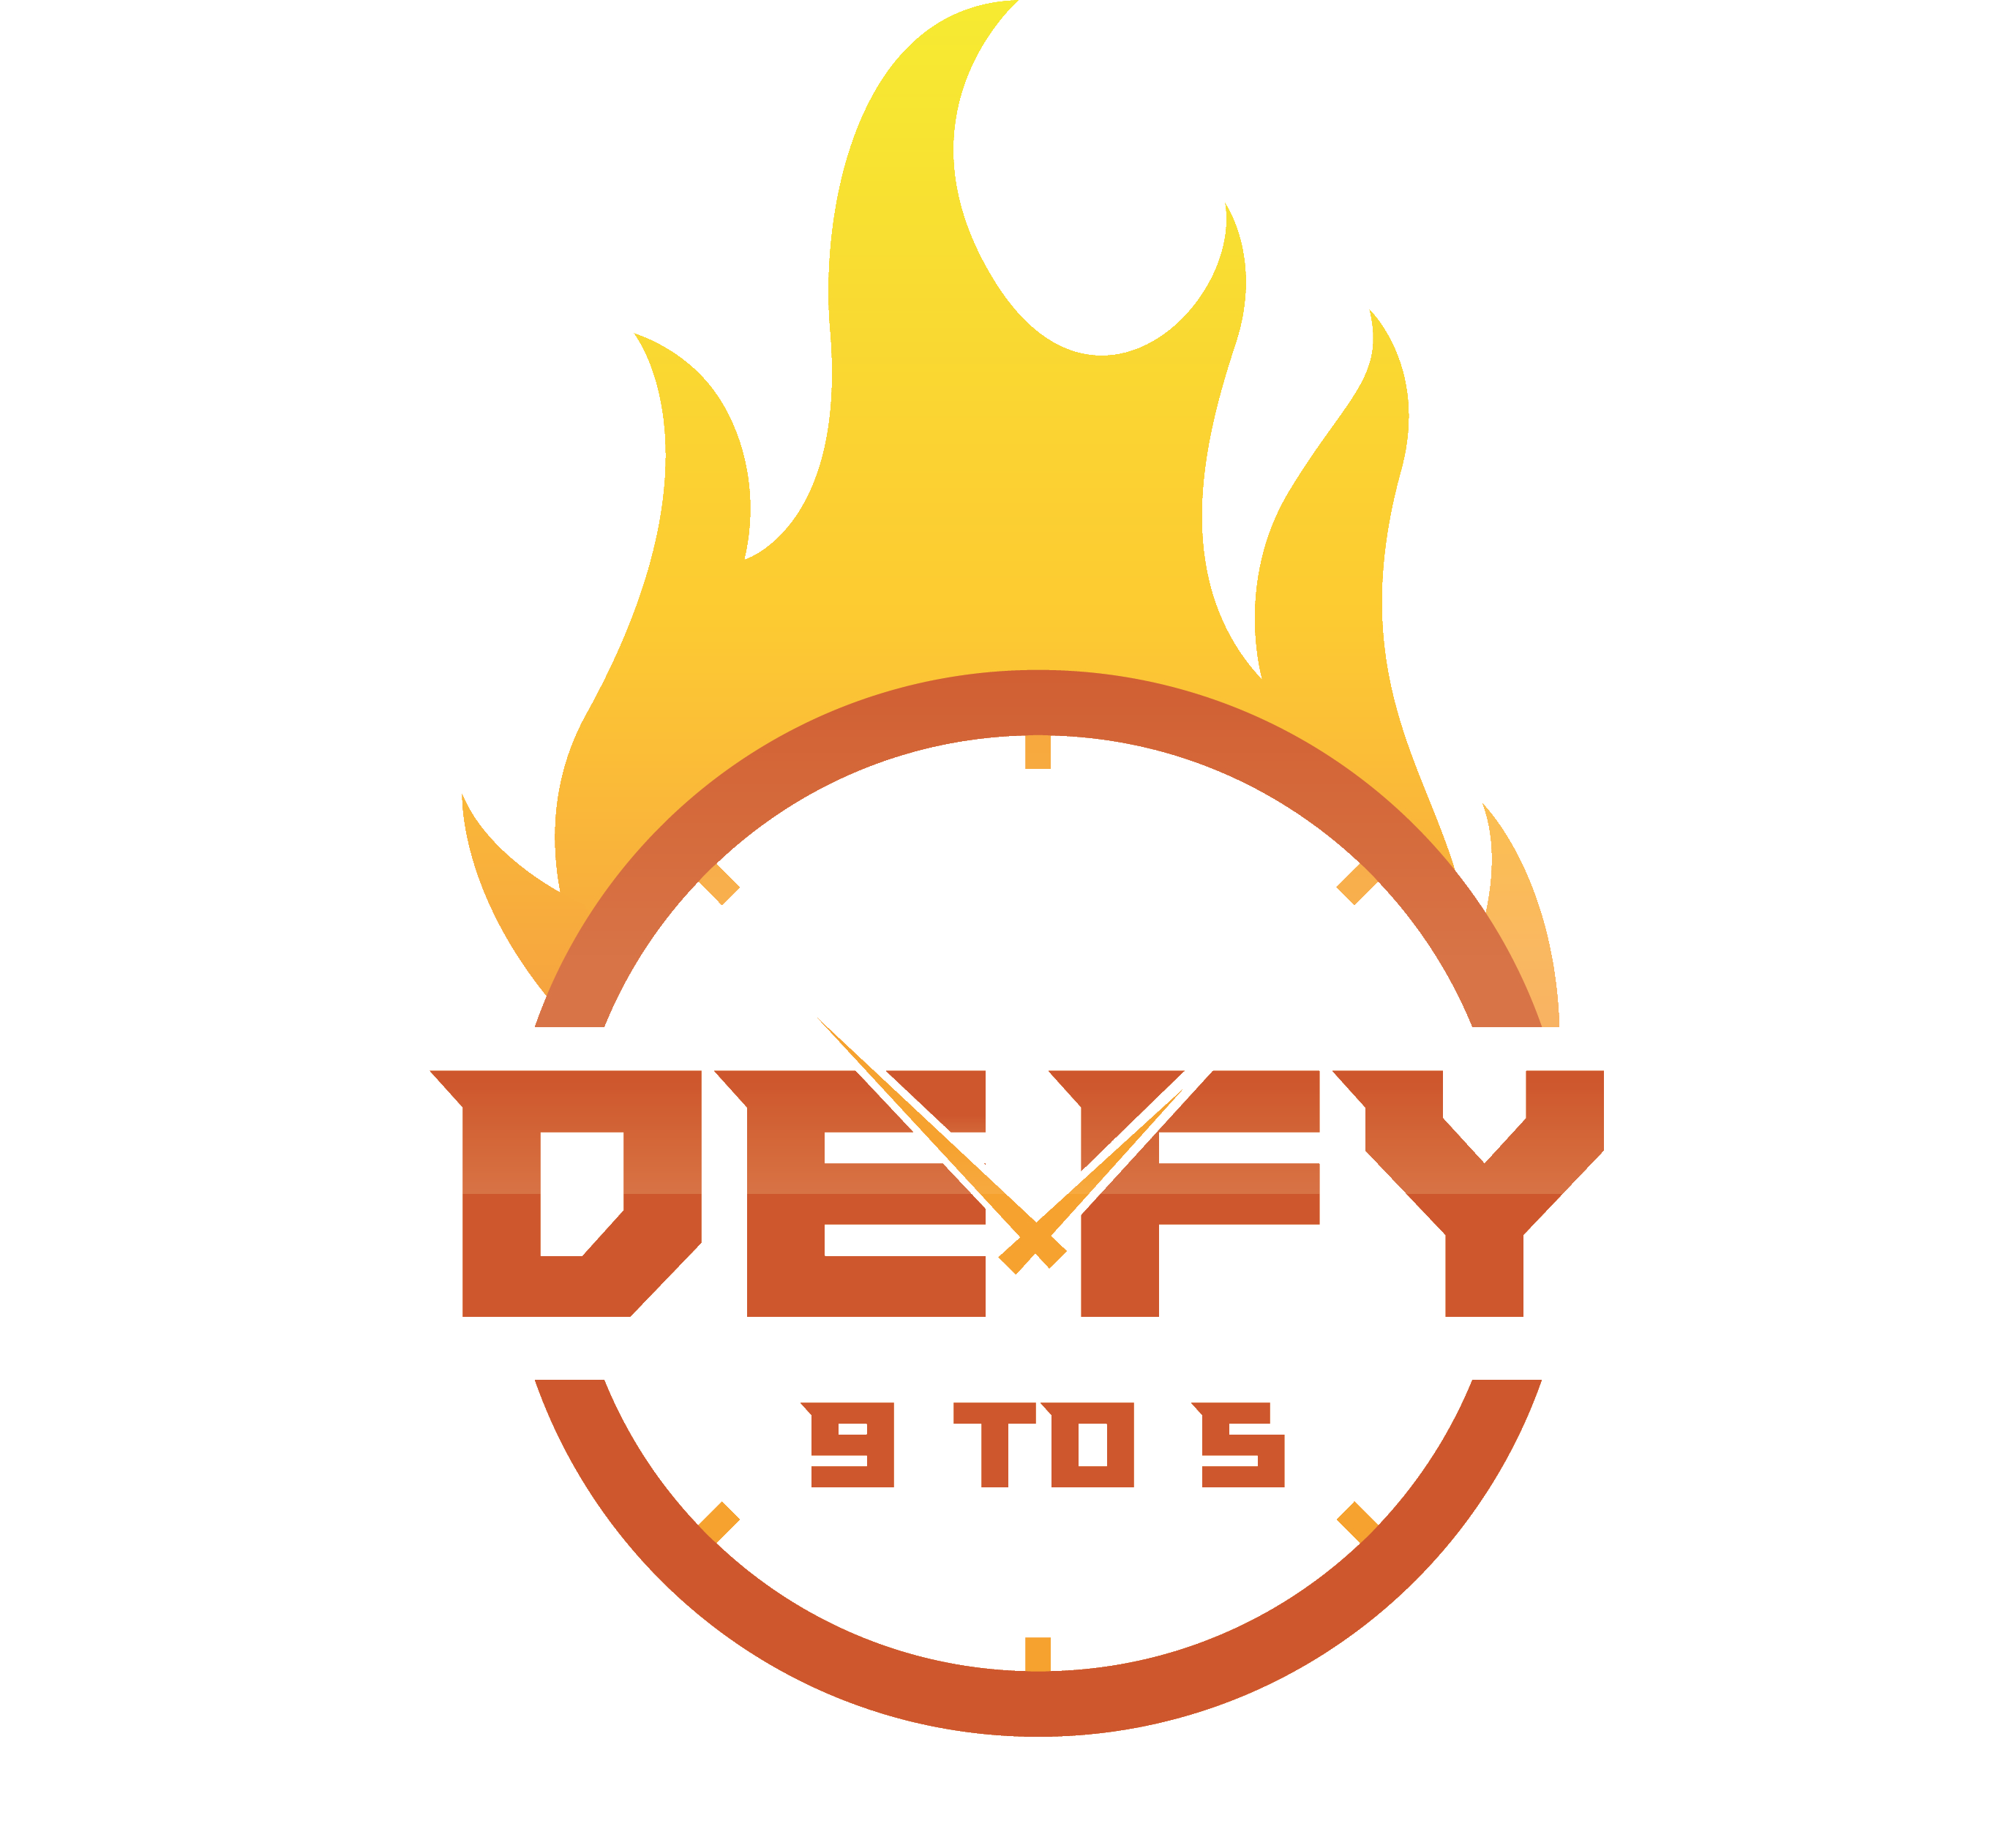 Defy 9 To 5